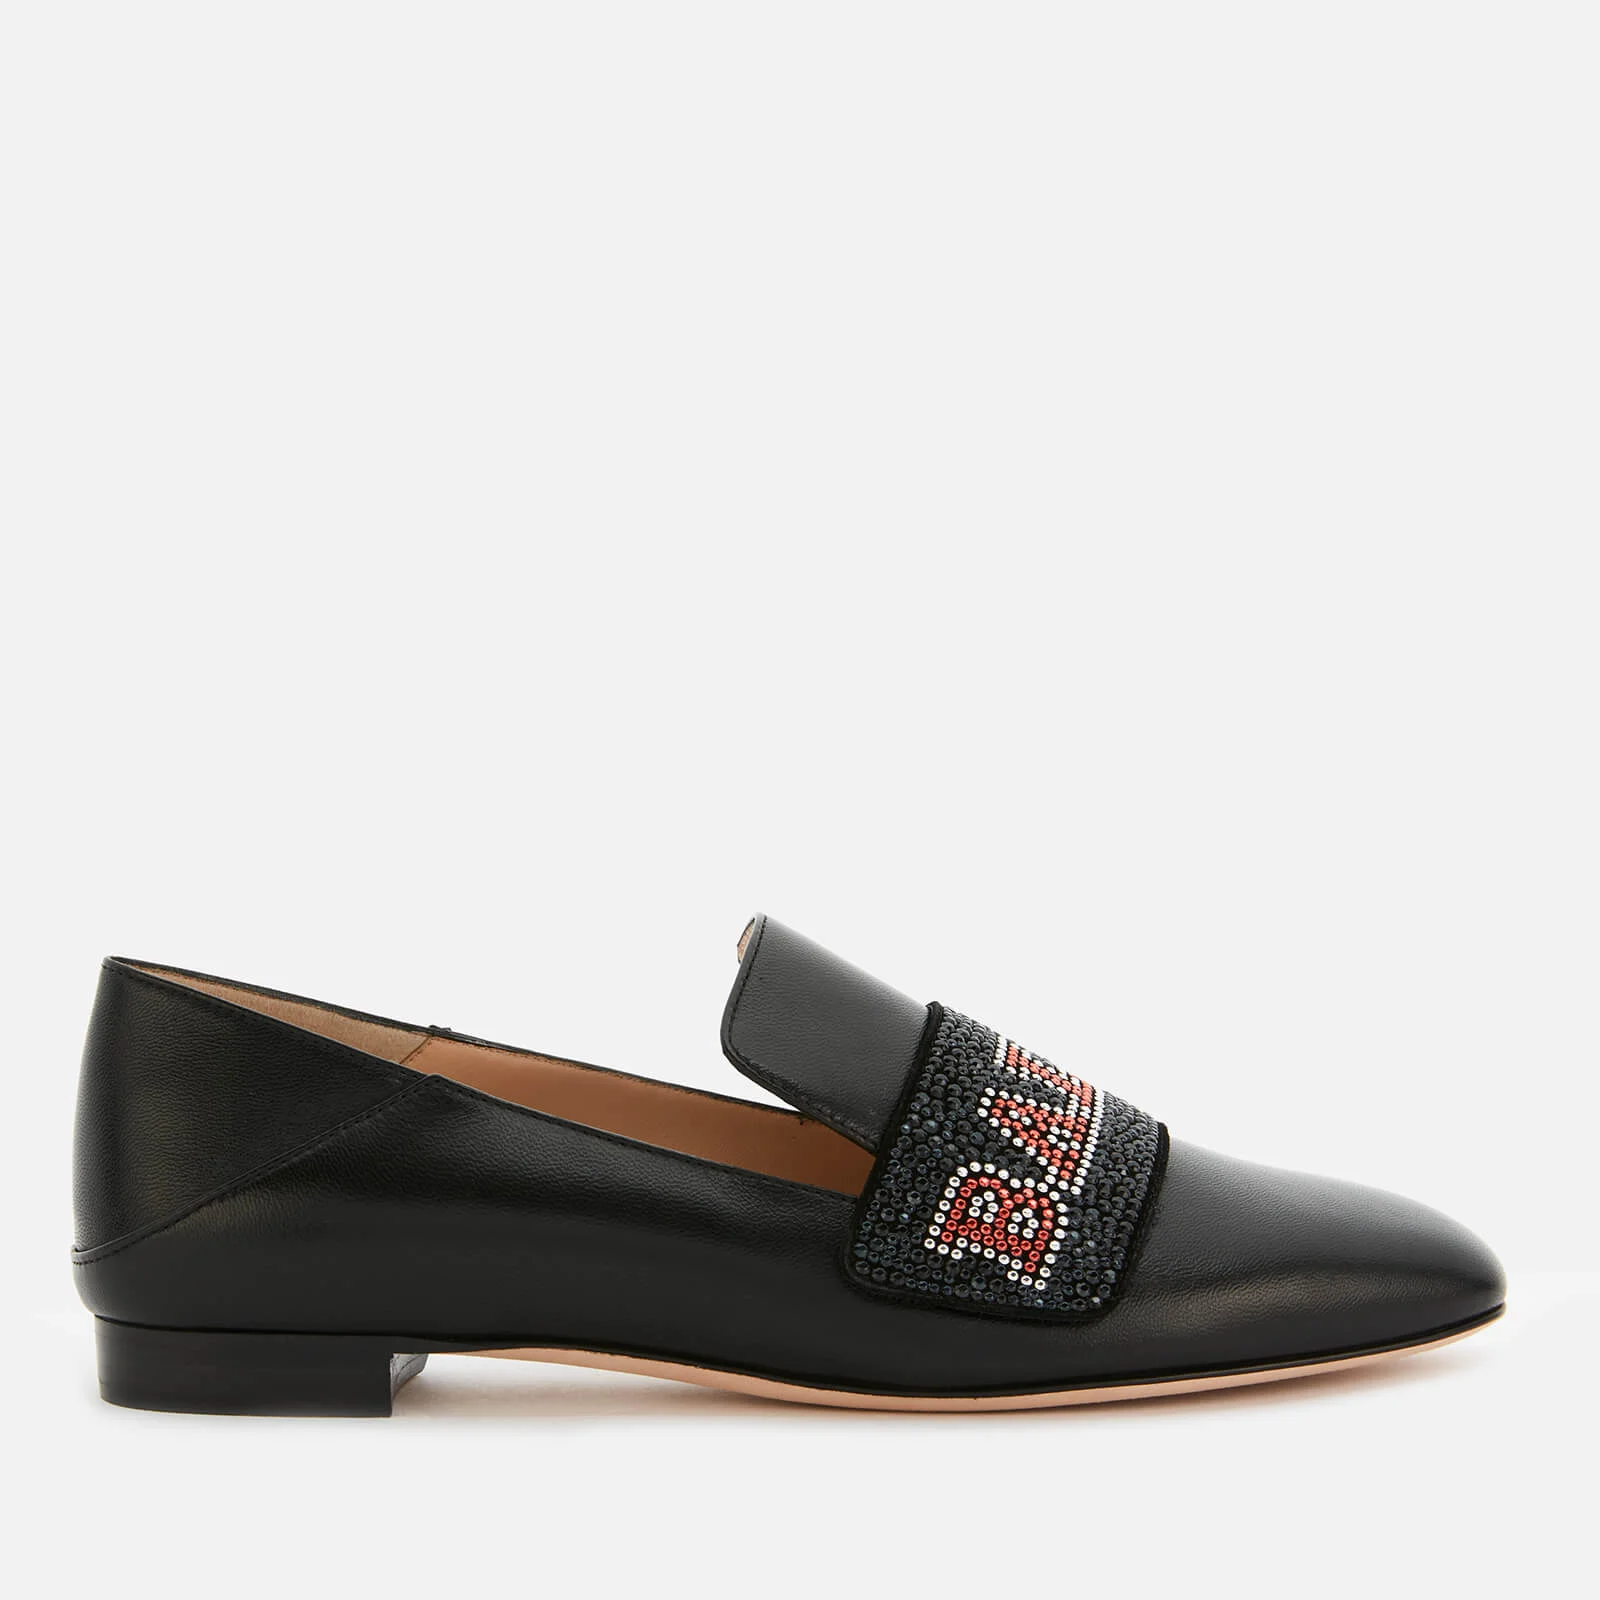 Bally Women's Jannie Flat Leather Loafers - Black Image 1